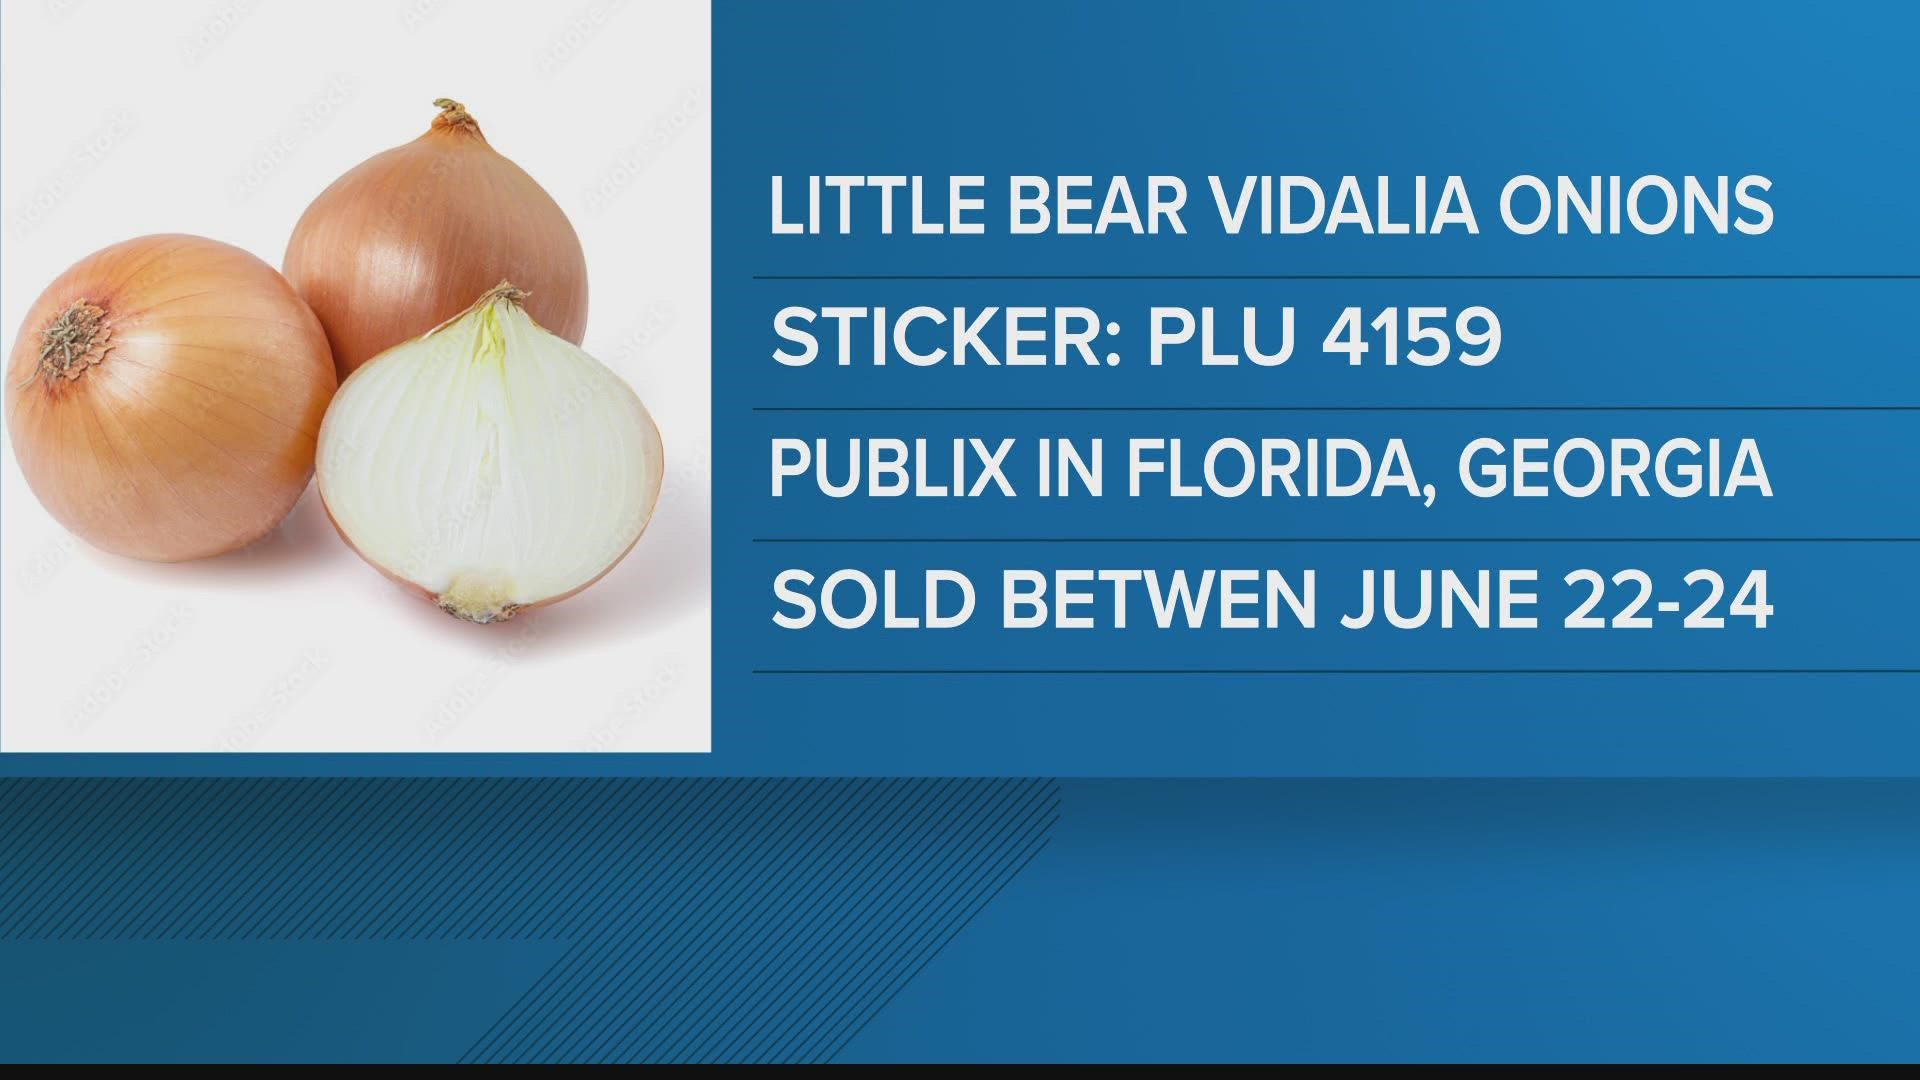 Little Bear brand Vidalia Sweet Onions sold in Florida and Georgia less than two weeks ago could be contaminated.